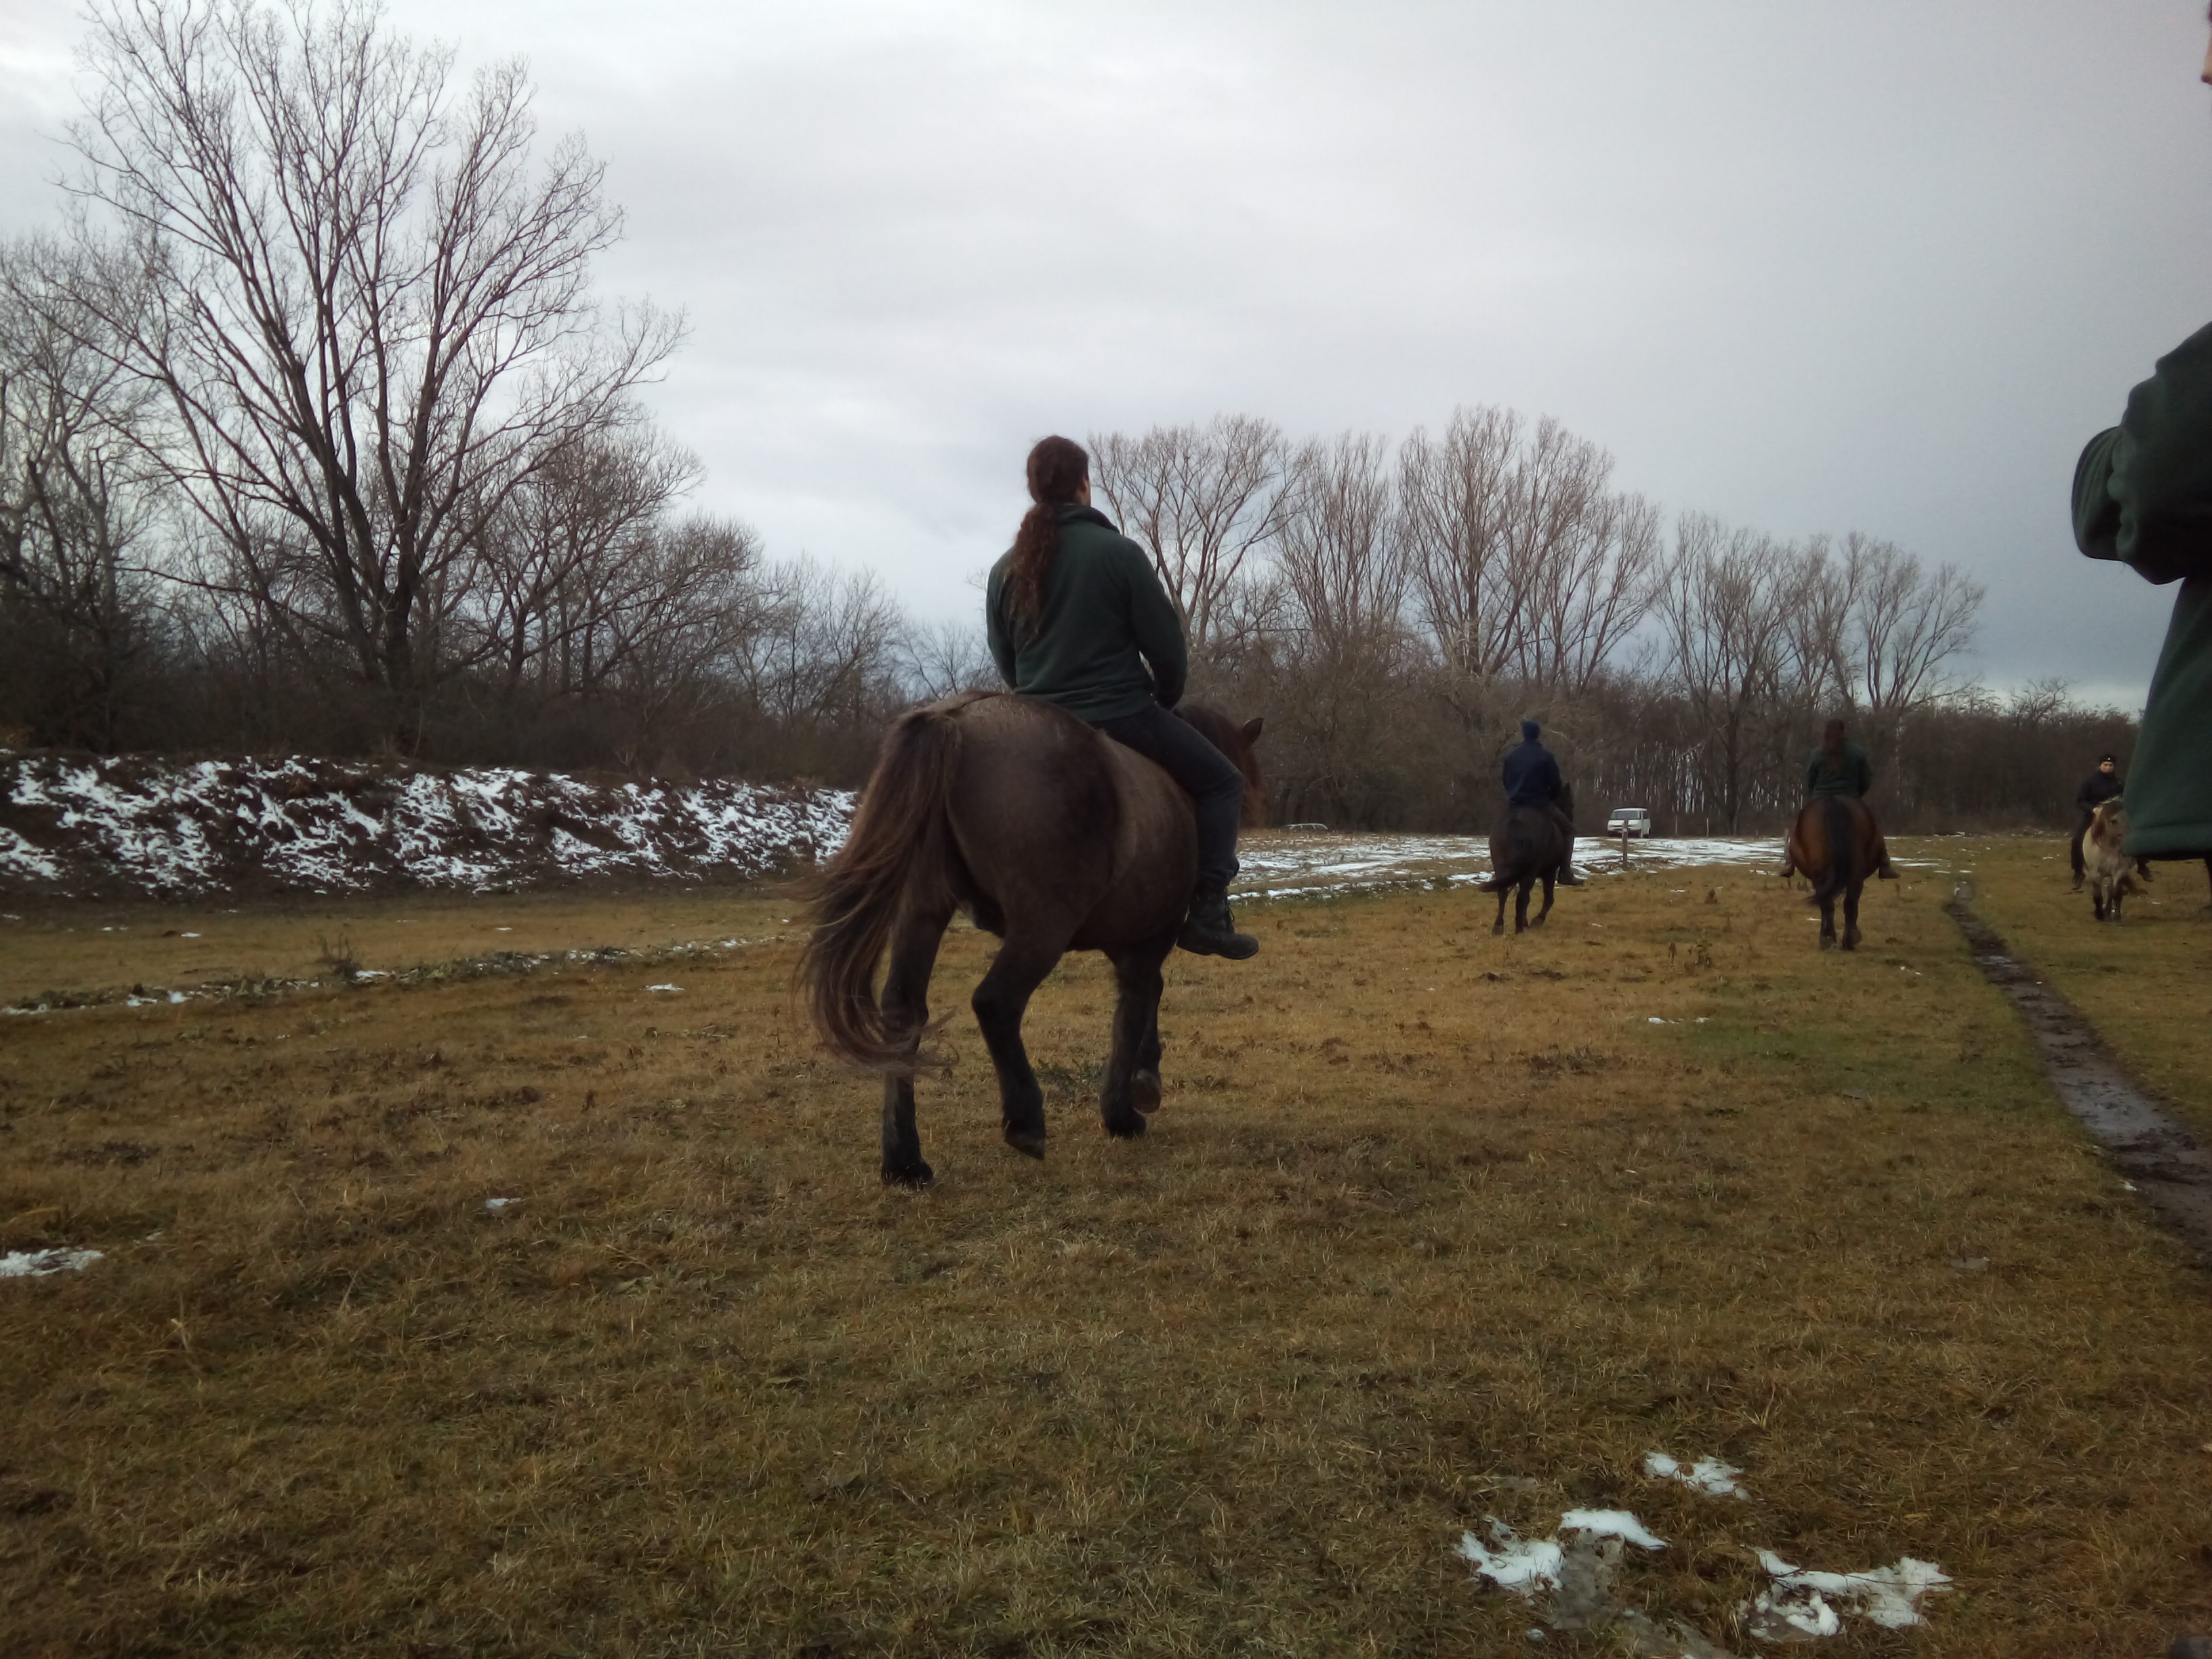 Training with the horses without a saddle